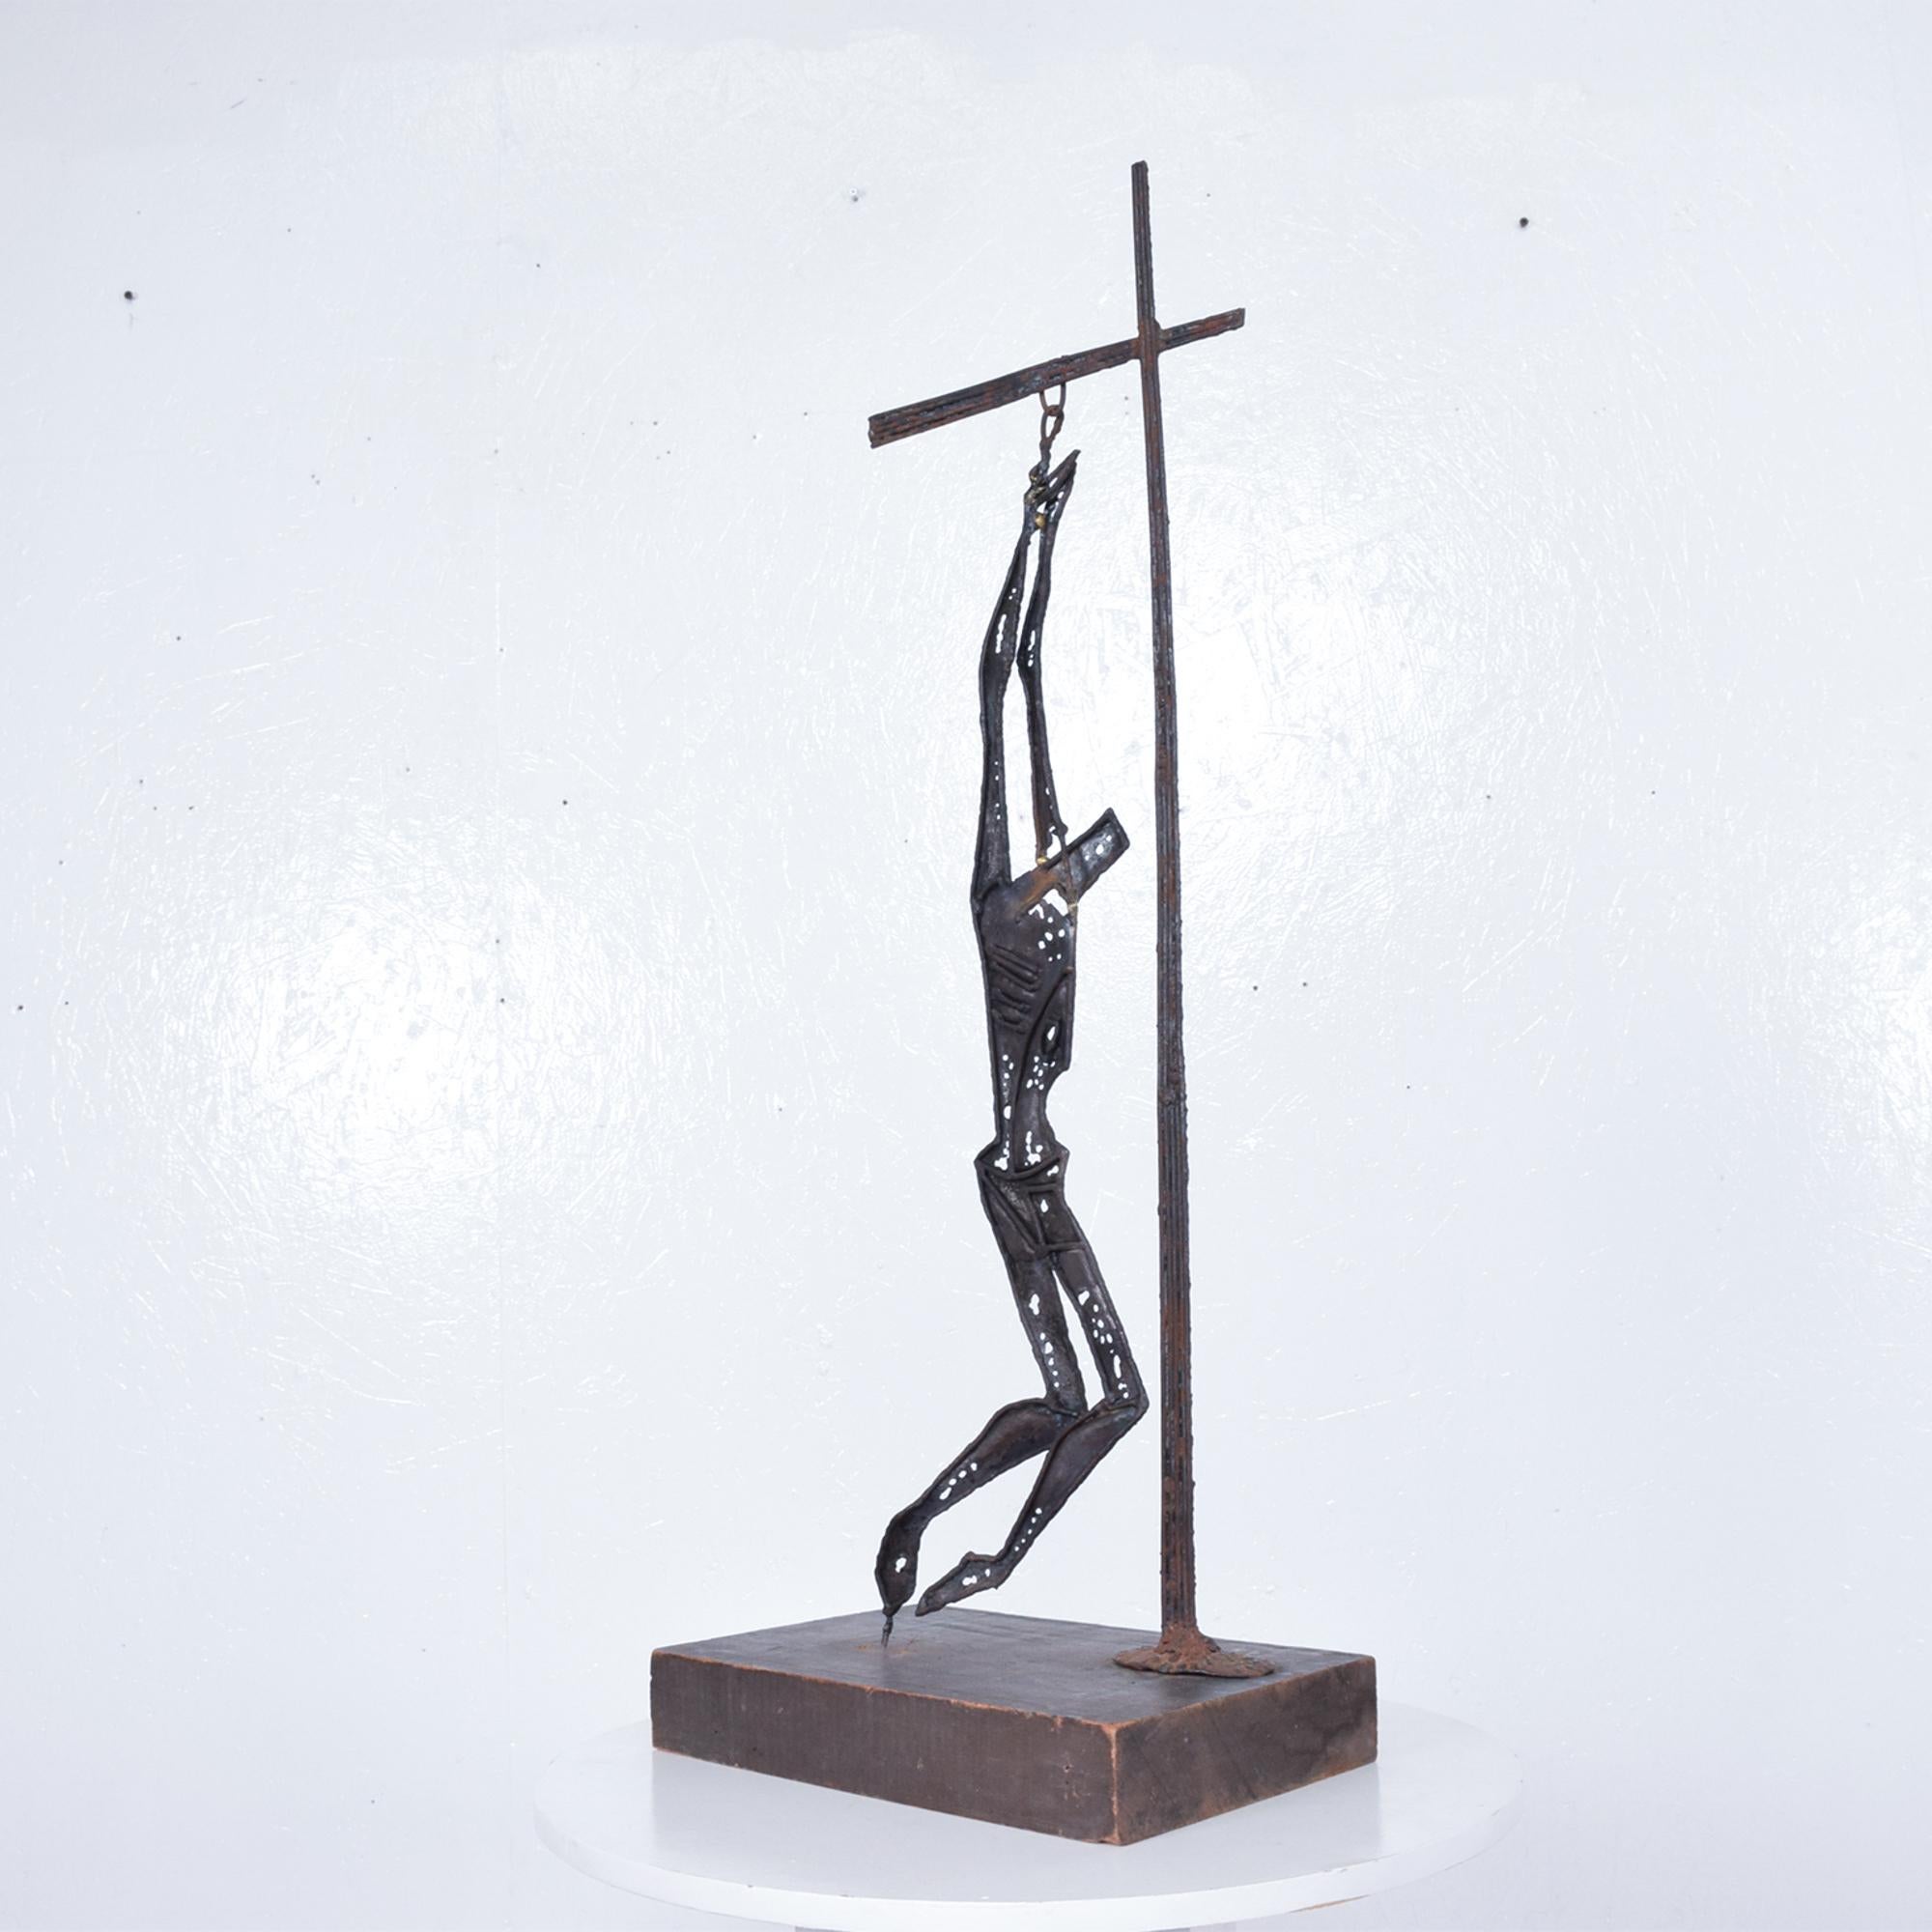 Abstract Sculpture Savior of Auschwitz Tortured Metal 1970s Mexico by EMAUS 4